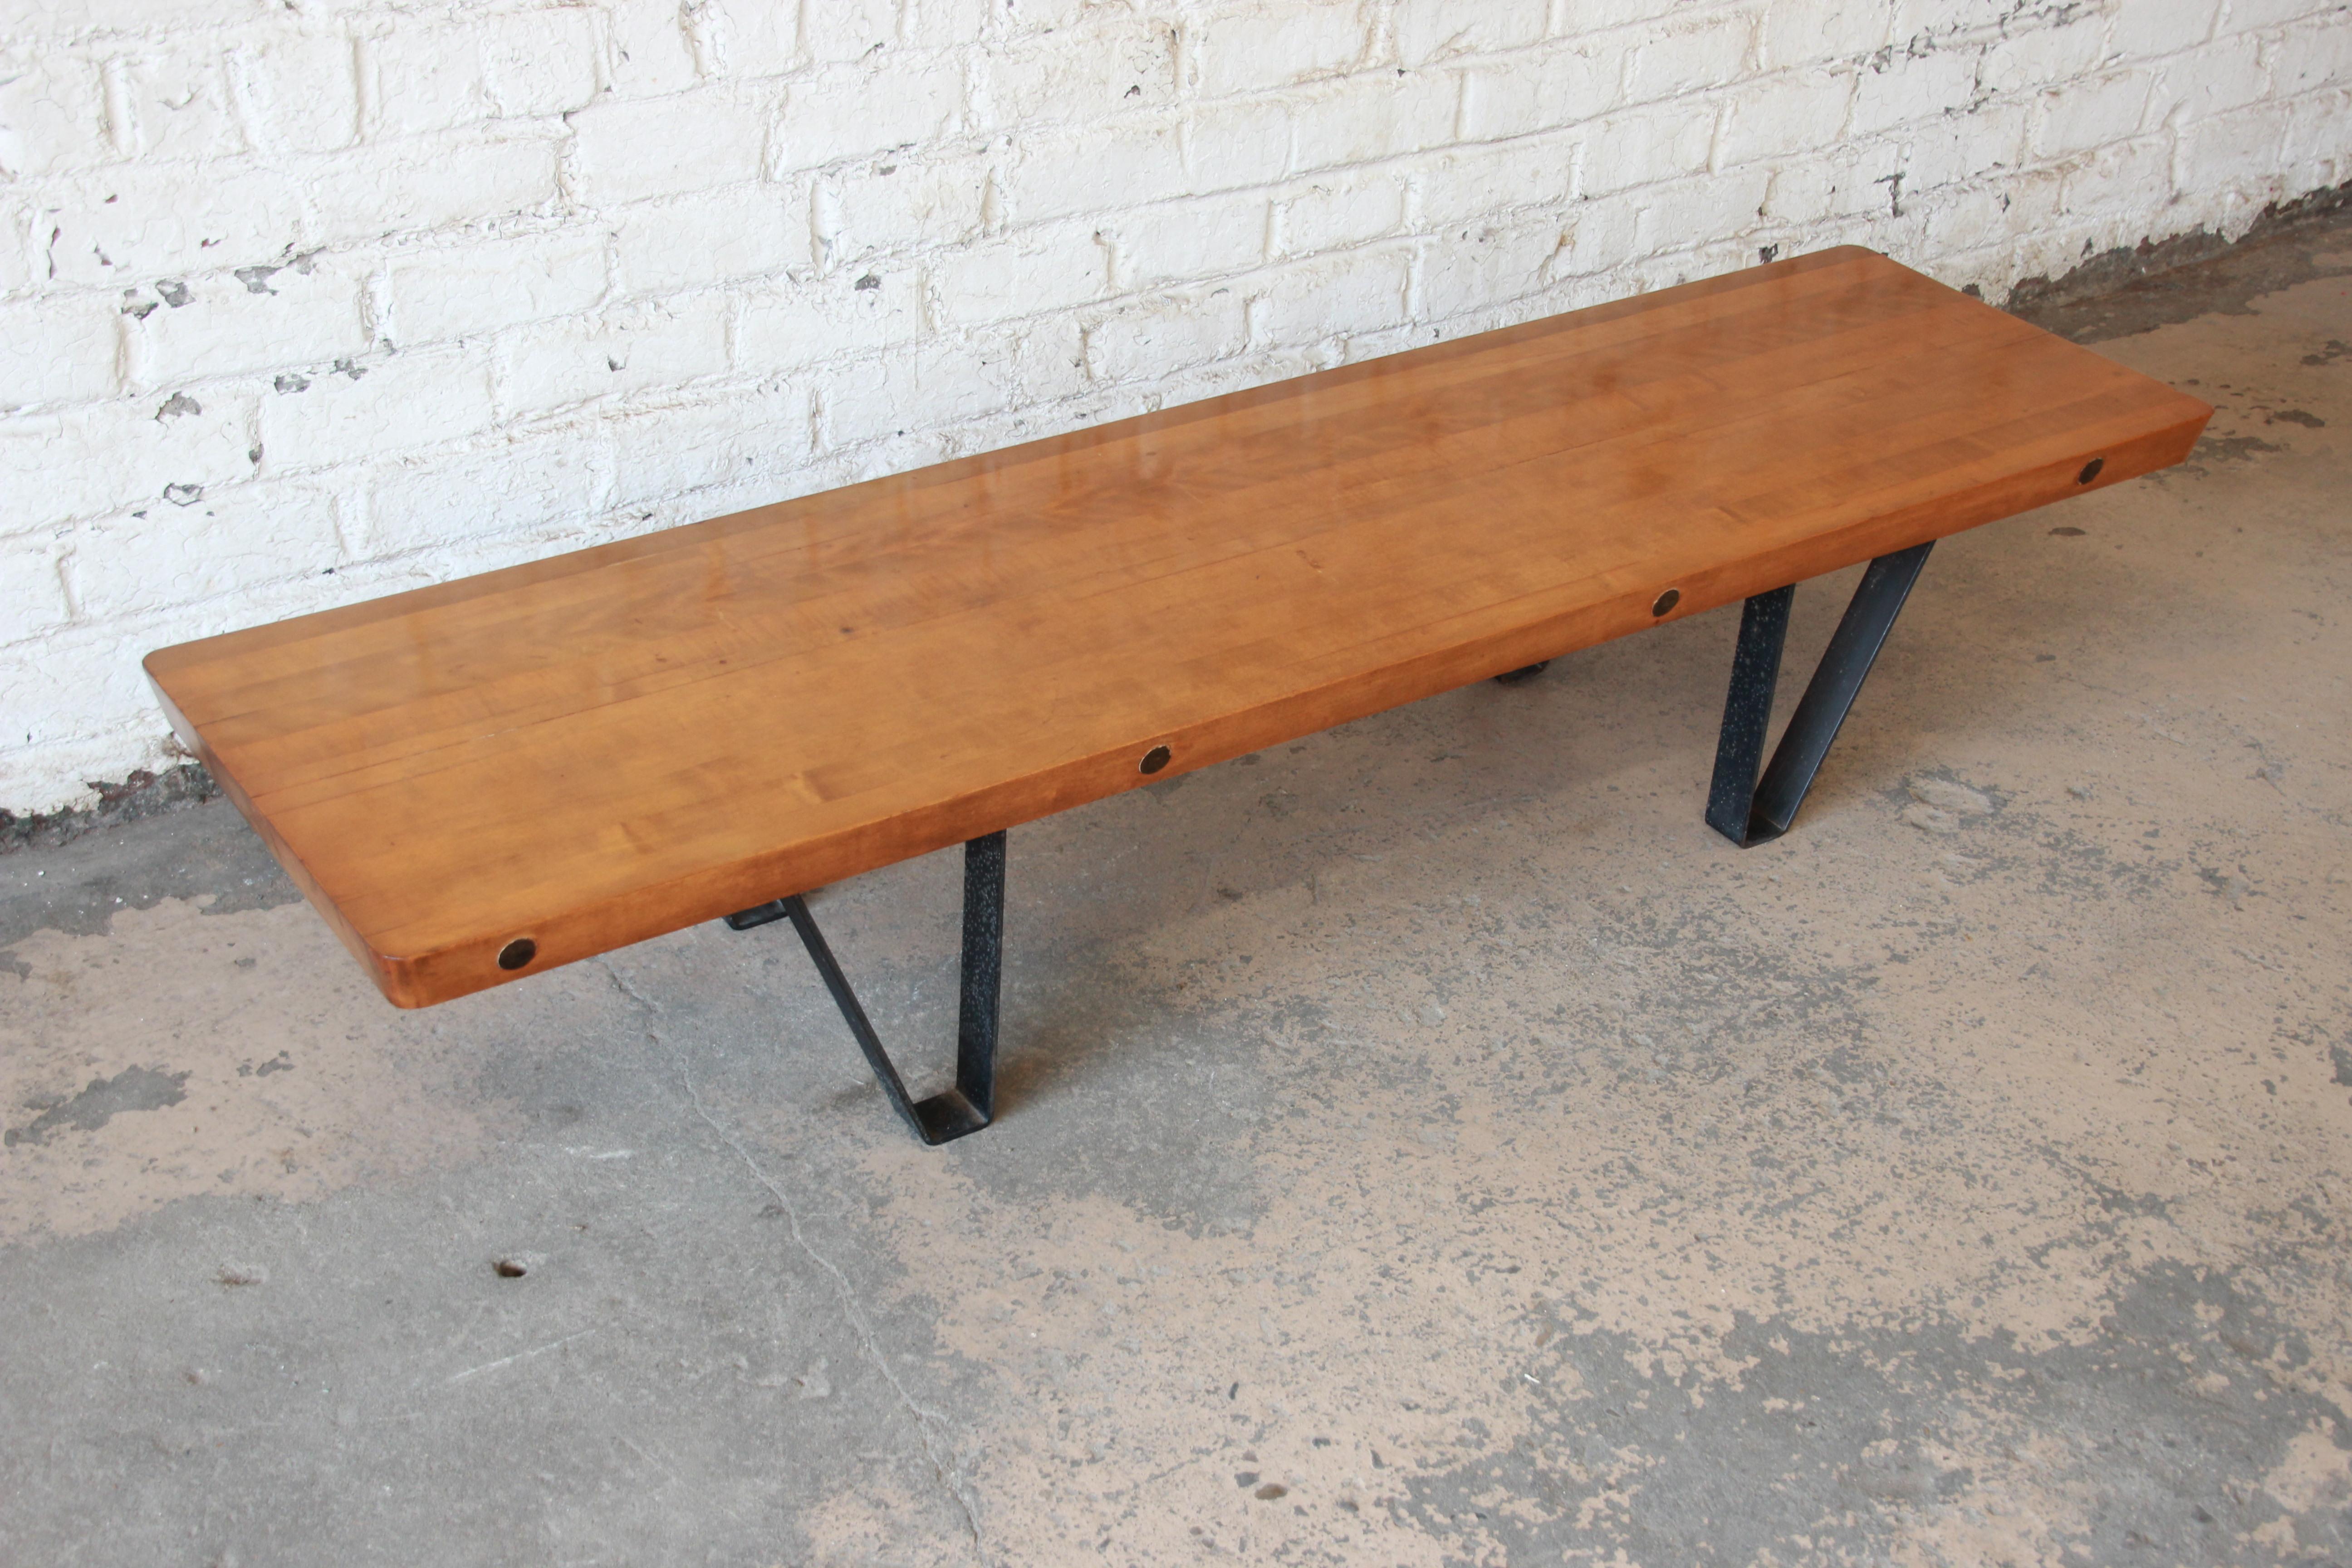 Offering a unique and one of kind vintage Mid-Century Modern long bench or coffee table with a bowling lane top. The legs are cast iron making the table very sturdy with the heavy bowling lane top. The table has sleep midcentury design and is fit to